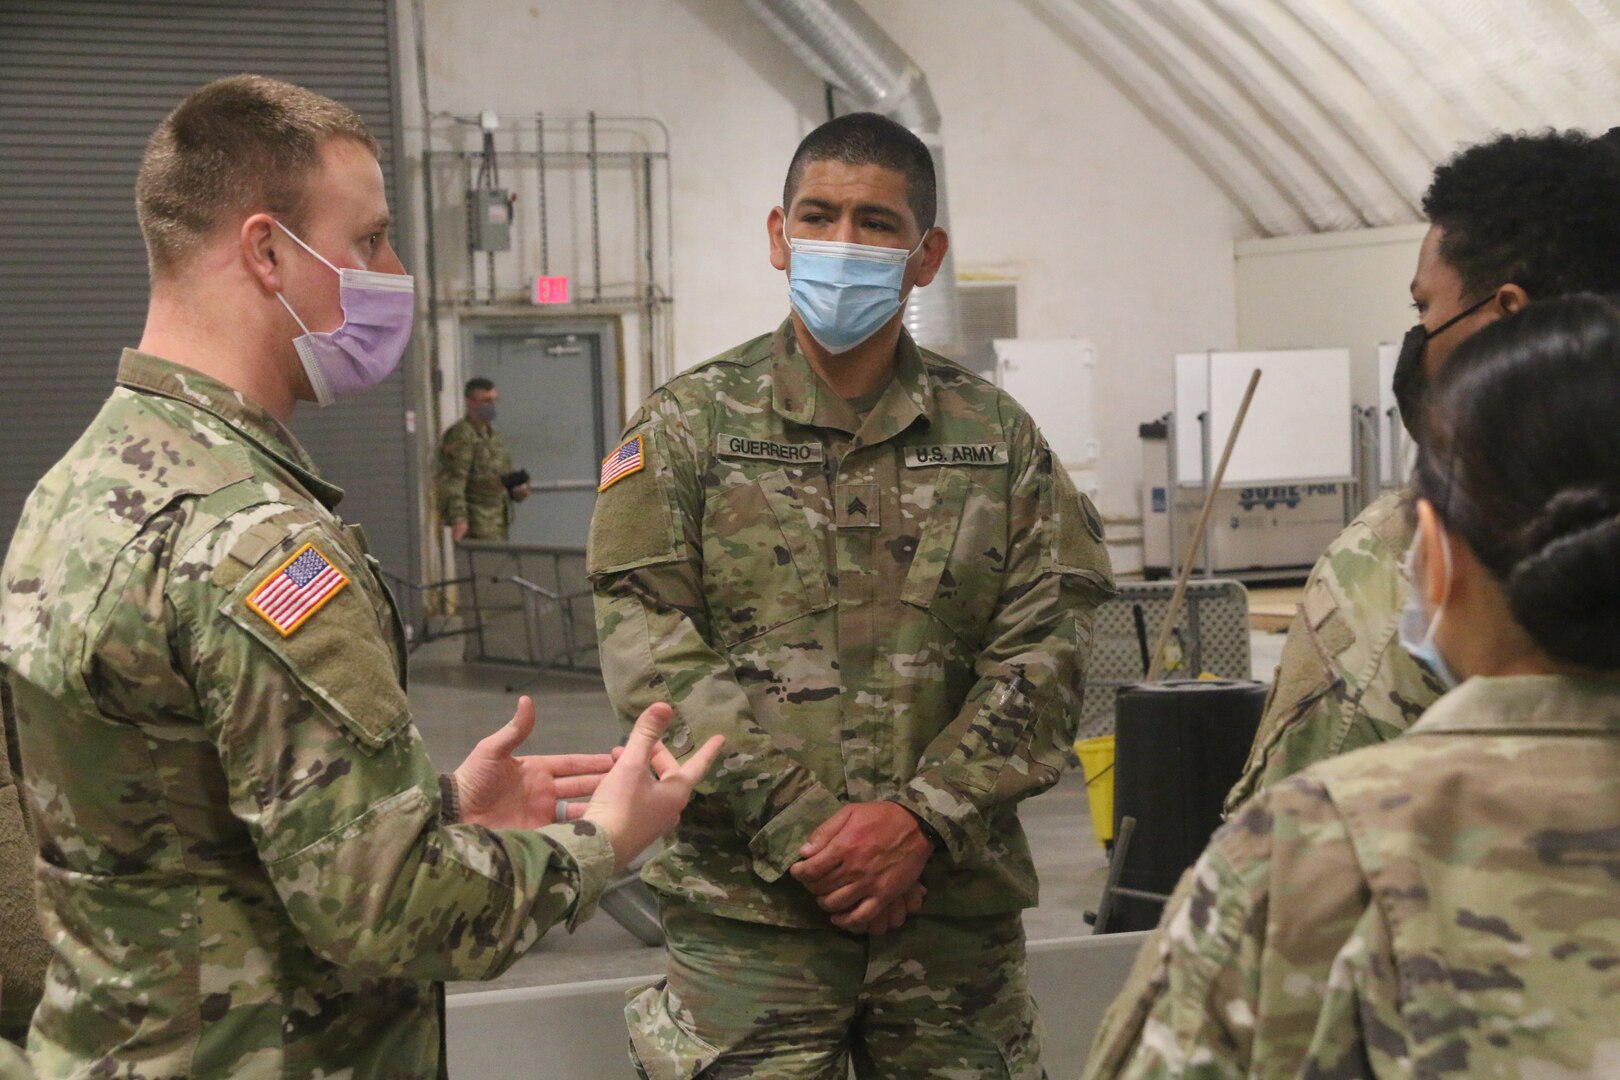 Virginia Army National Guard combat medics conduct refresher training Jan. 27, 2022, at the State Military Reservation in Virginia Beach, Virginia. Twenty-seven Soldiers participated in the training, conducted by the Virginia Army National Guard Medical Command.